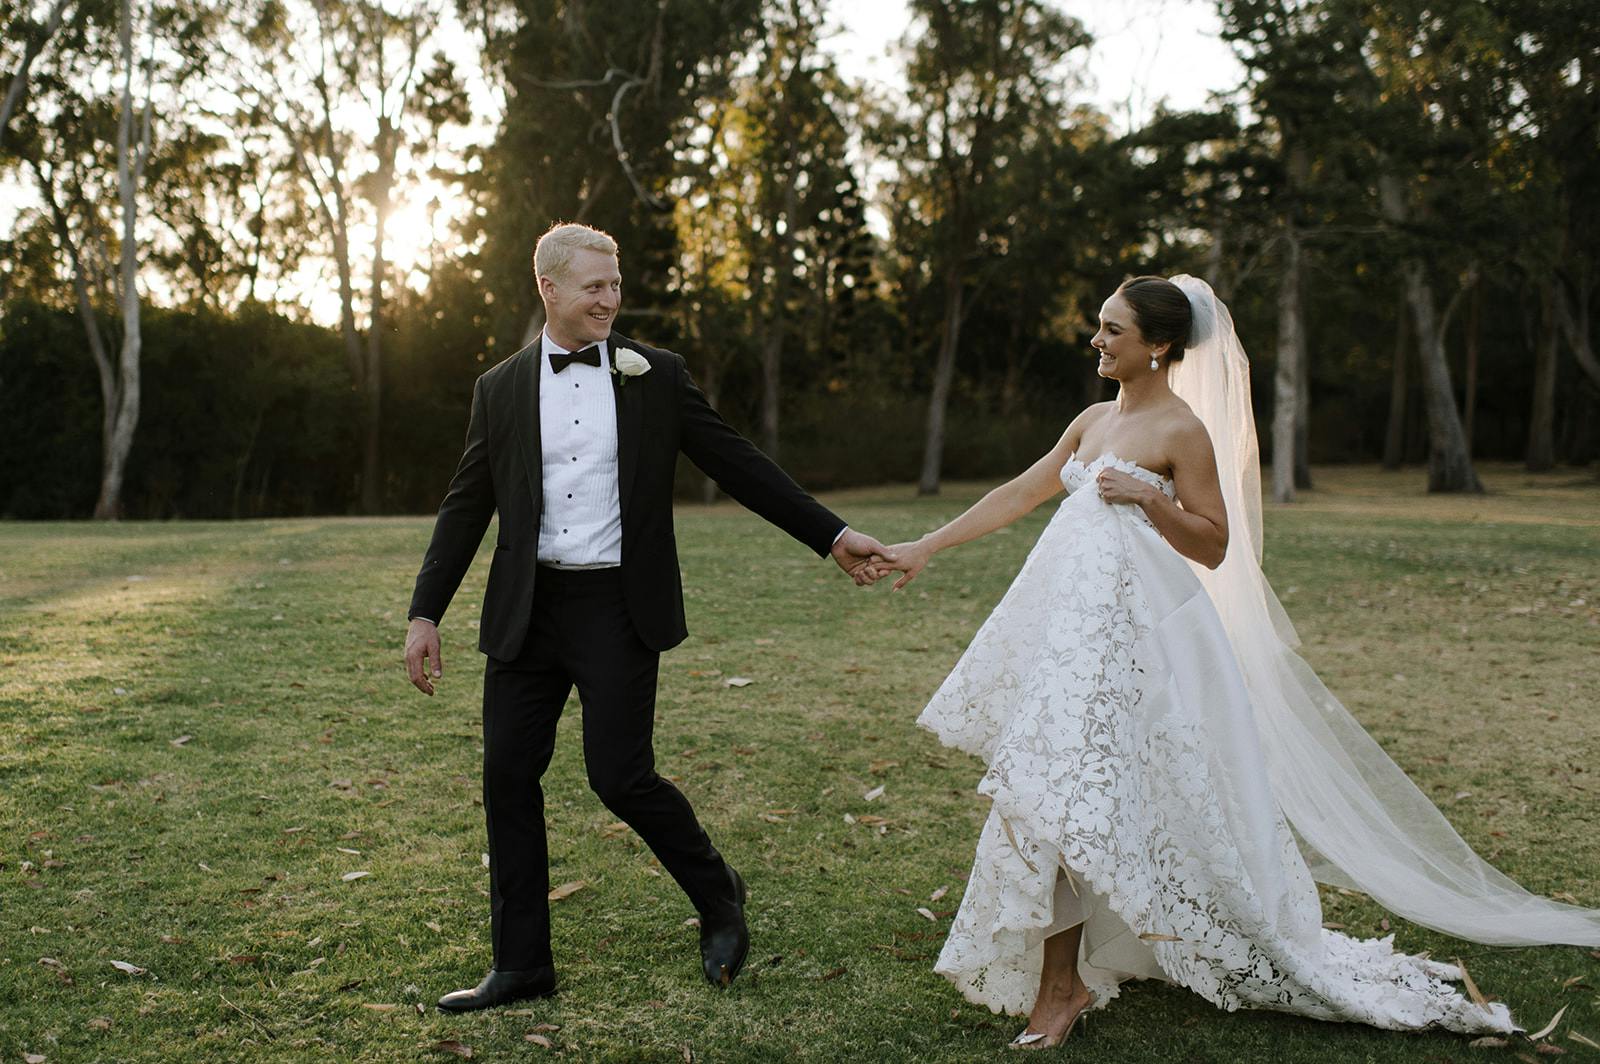 A couple walks hand-in-hand on a grassy field at sunset. The groom wears a black tuxedo with a white rose boutonniere, while the bride wears a strapless white lace wedding dress and a long veil. Both are smiling as they look at each other. Trees are in the background.